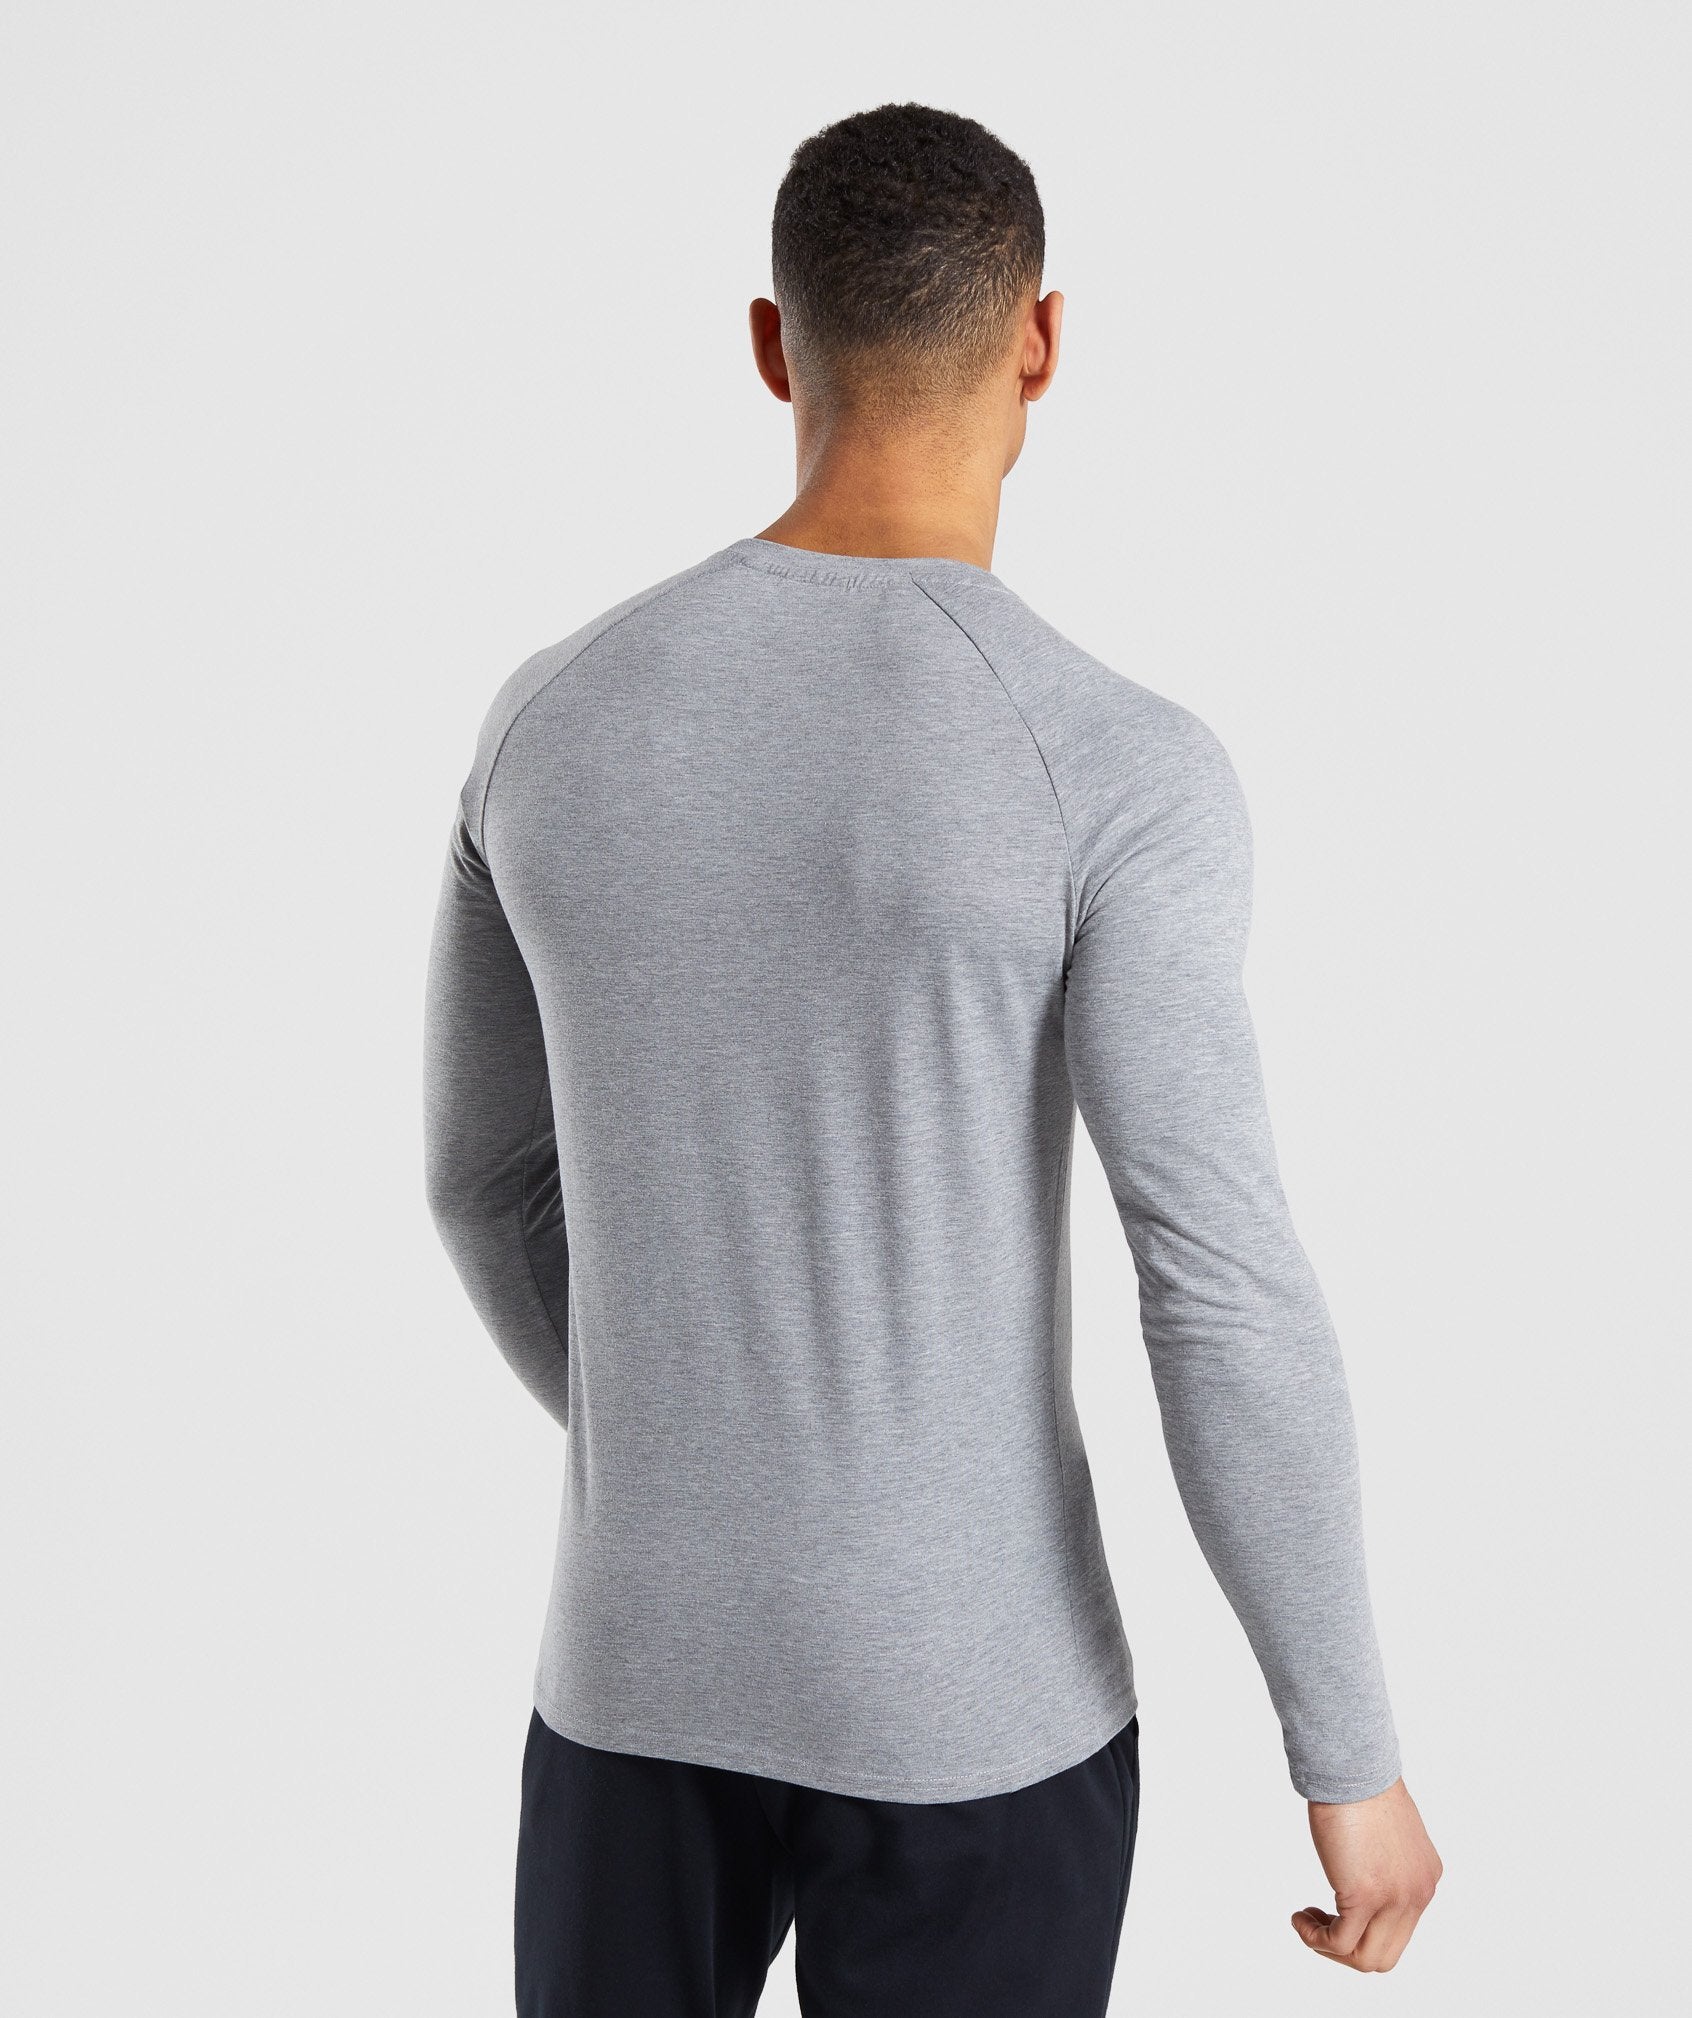 Apollo Long Sleeve T-Shirt in Grey - view 2